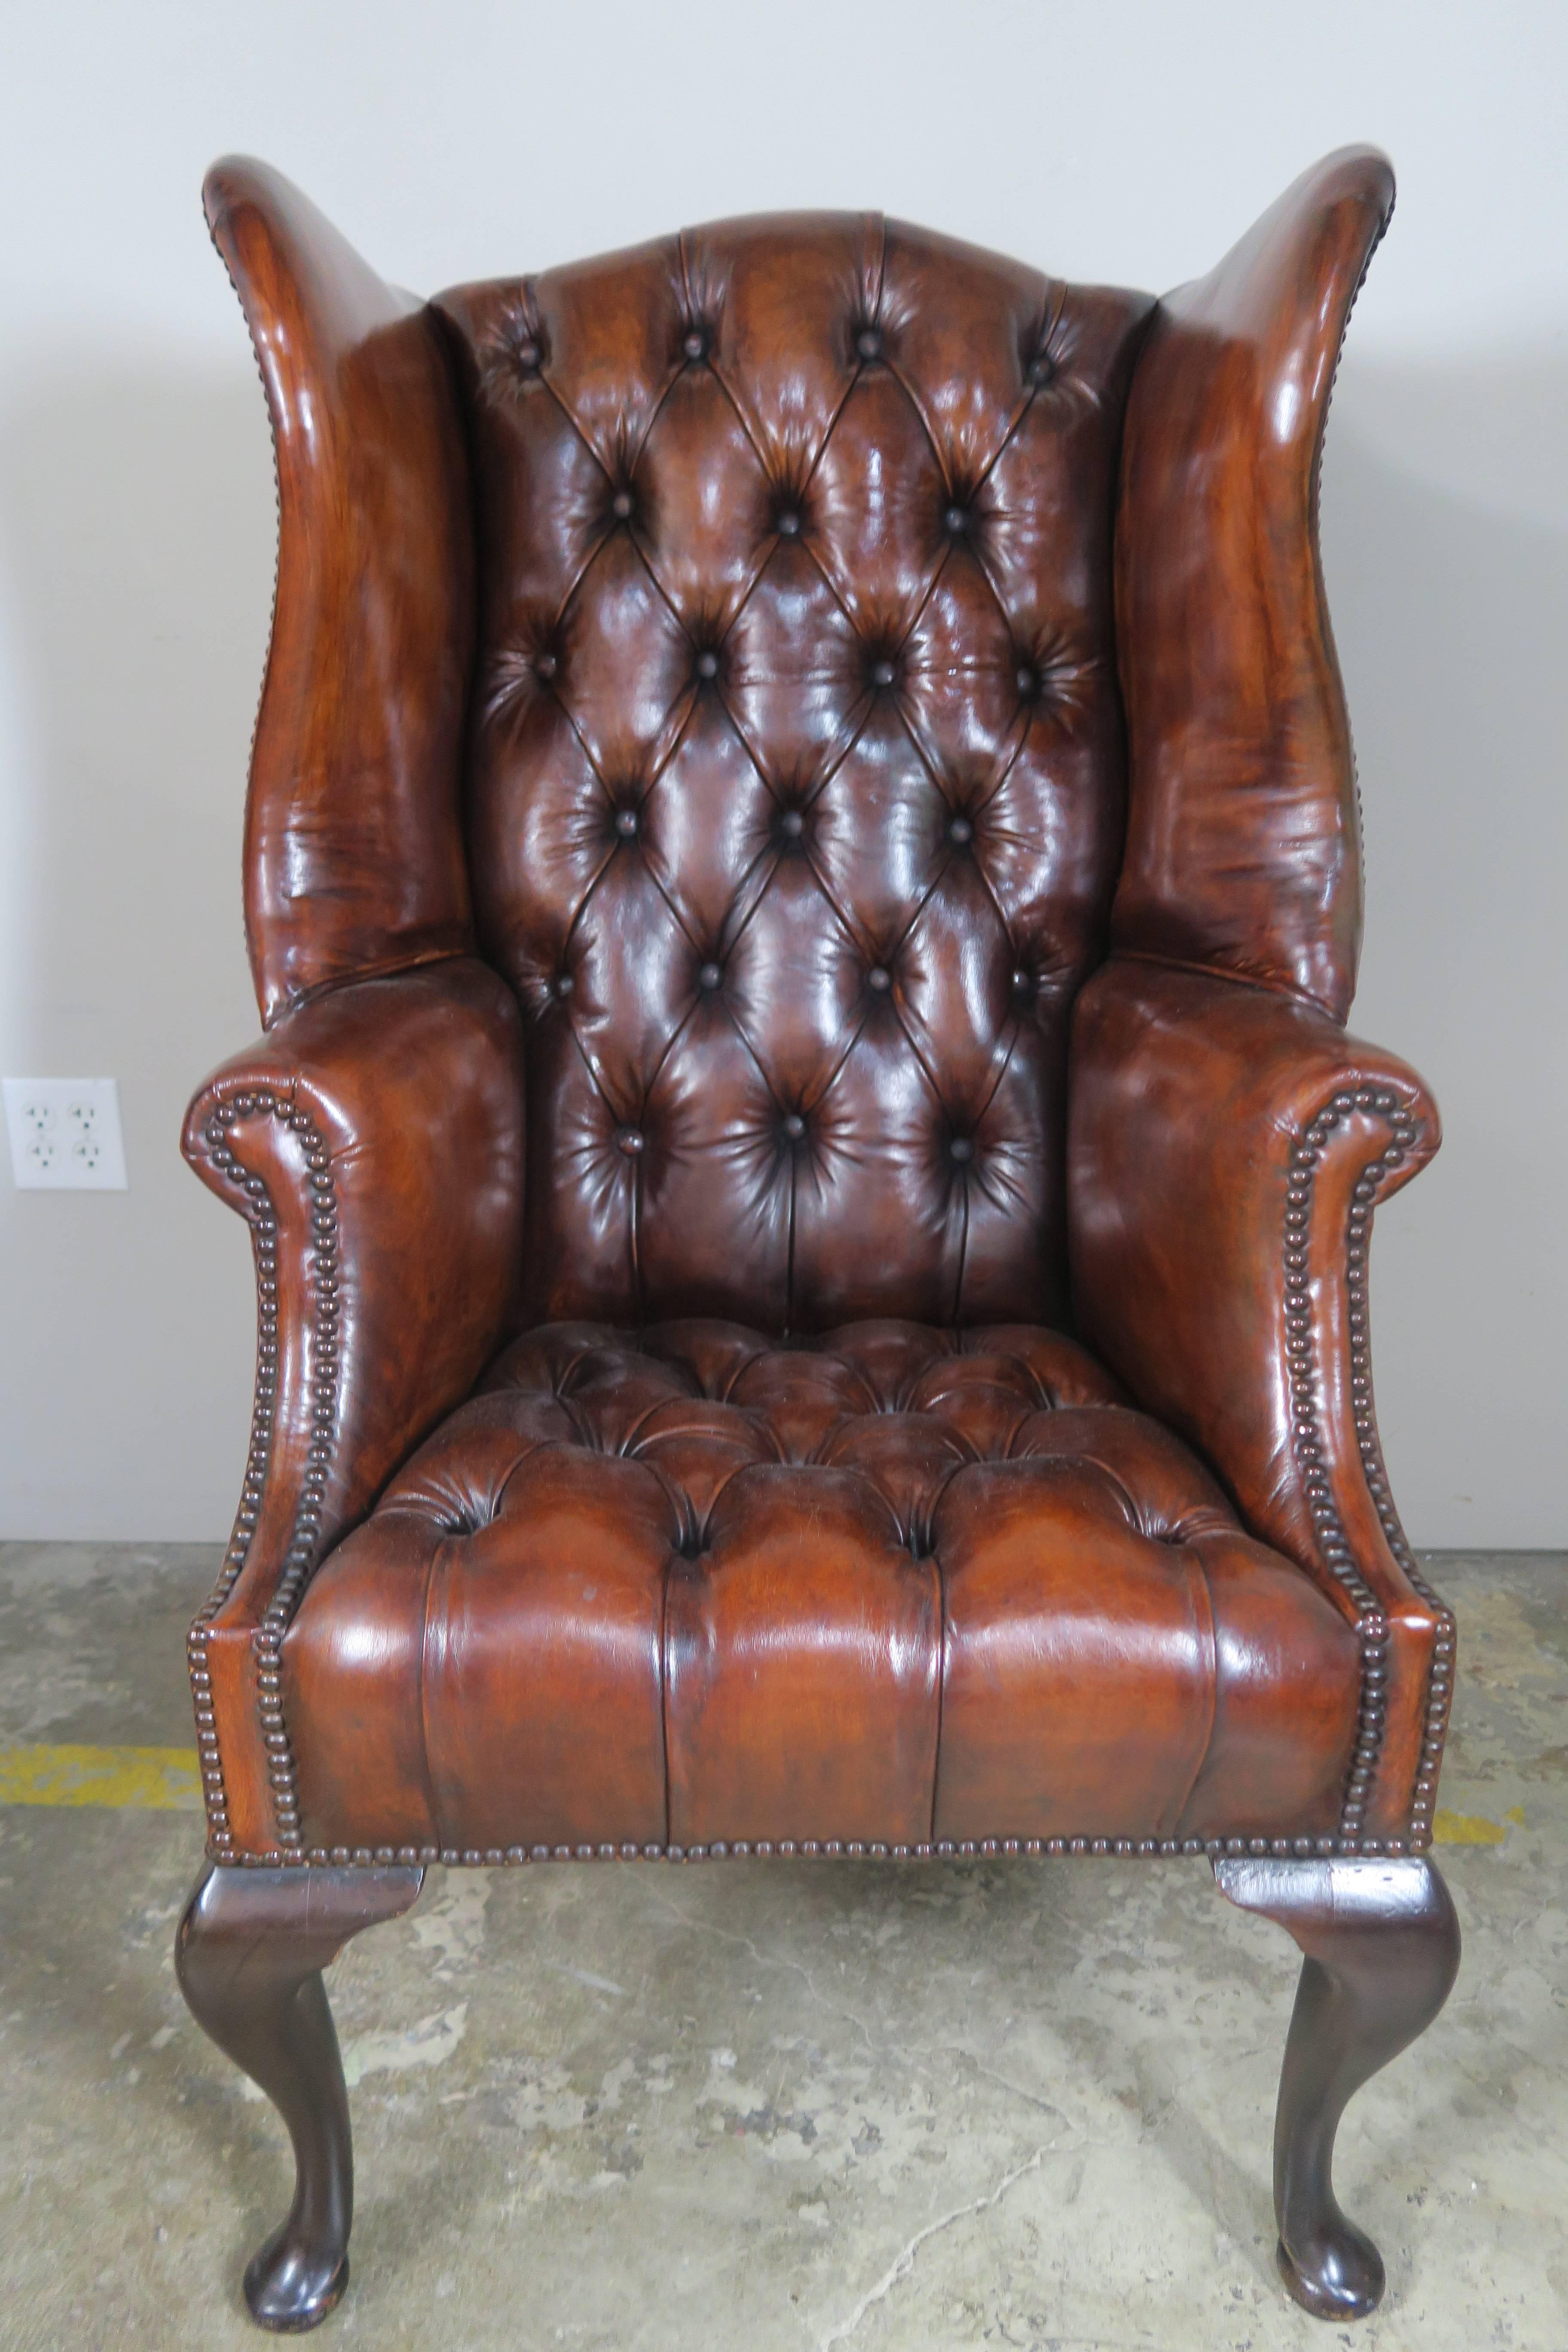 Chestnut colored leather tufted 1900s English wing back armchairs standing on four Queen Anne style legs. Finished with antique brass nailhead trim detail.
 